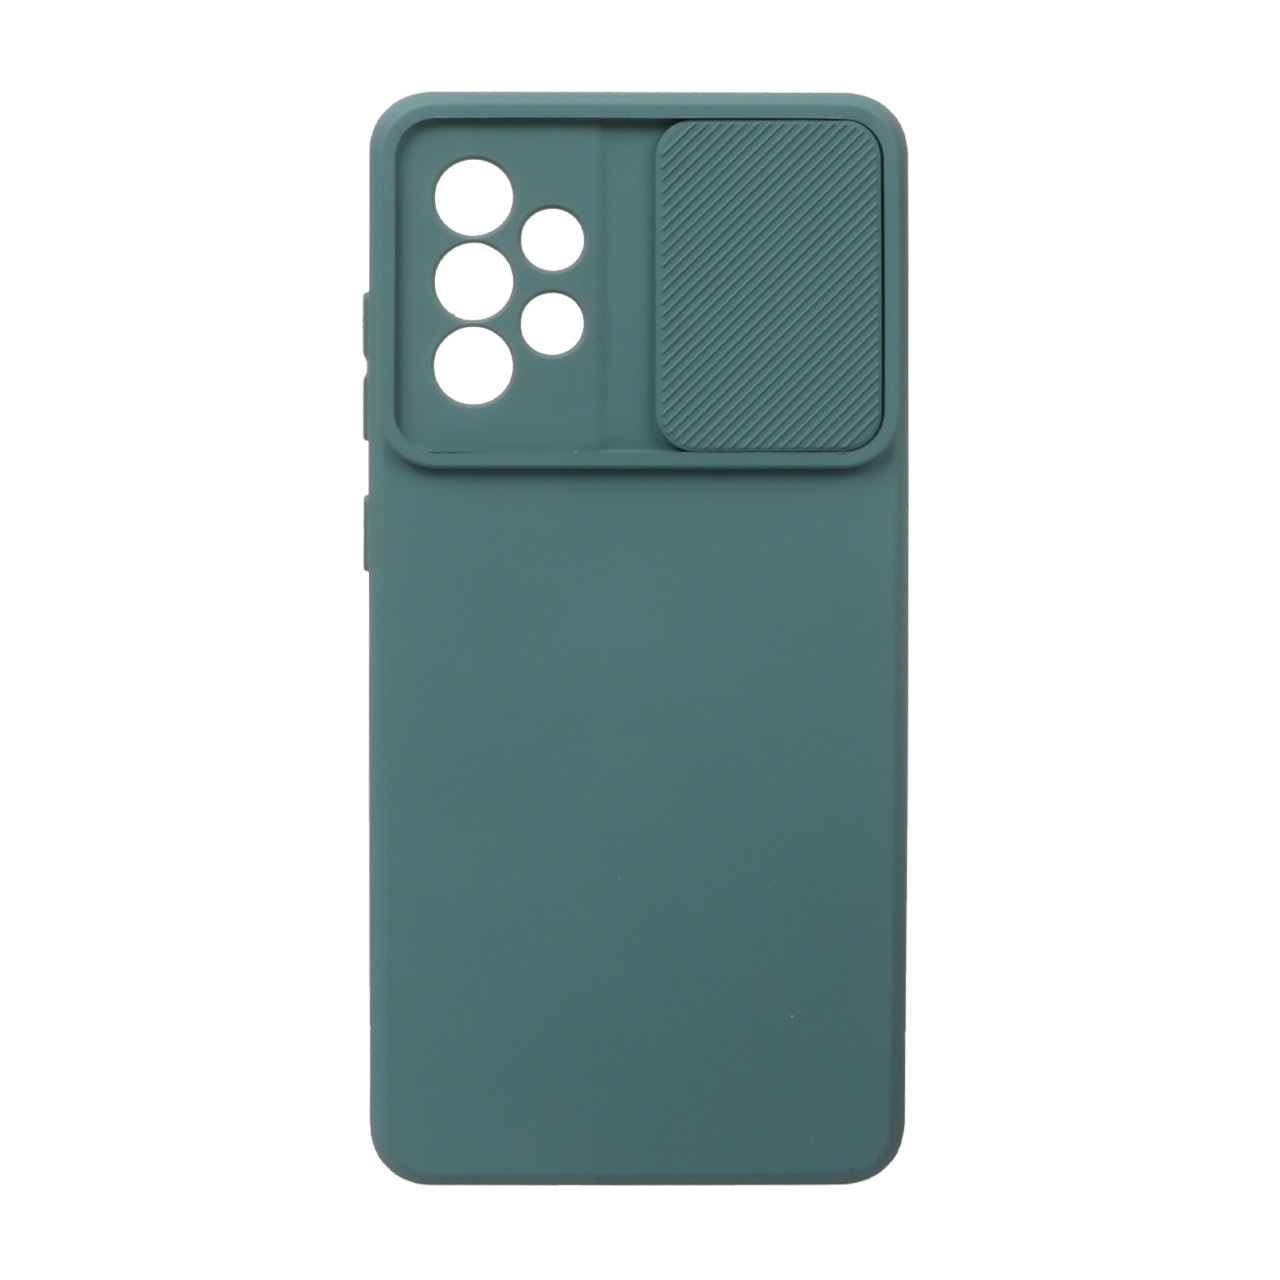 Cover Case For Samsung Galaxy A72